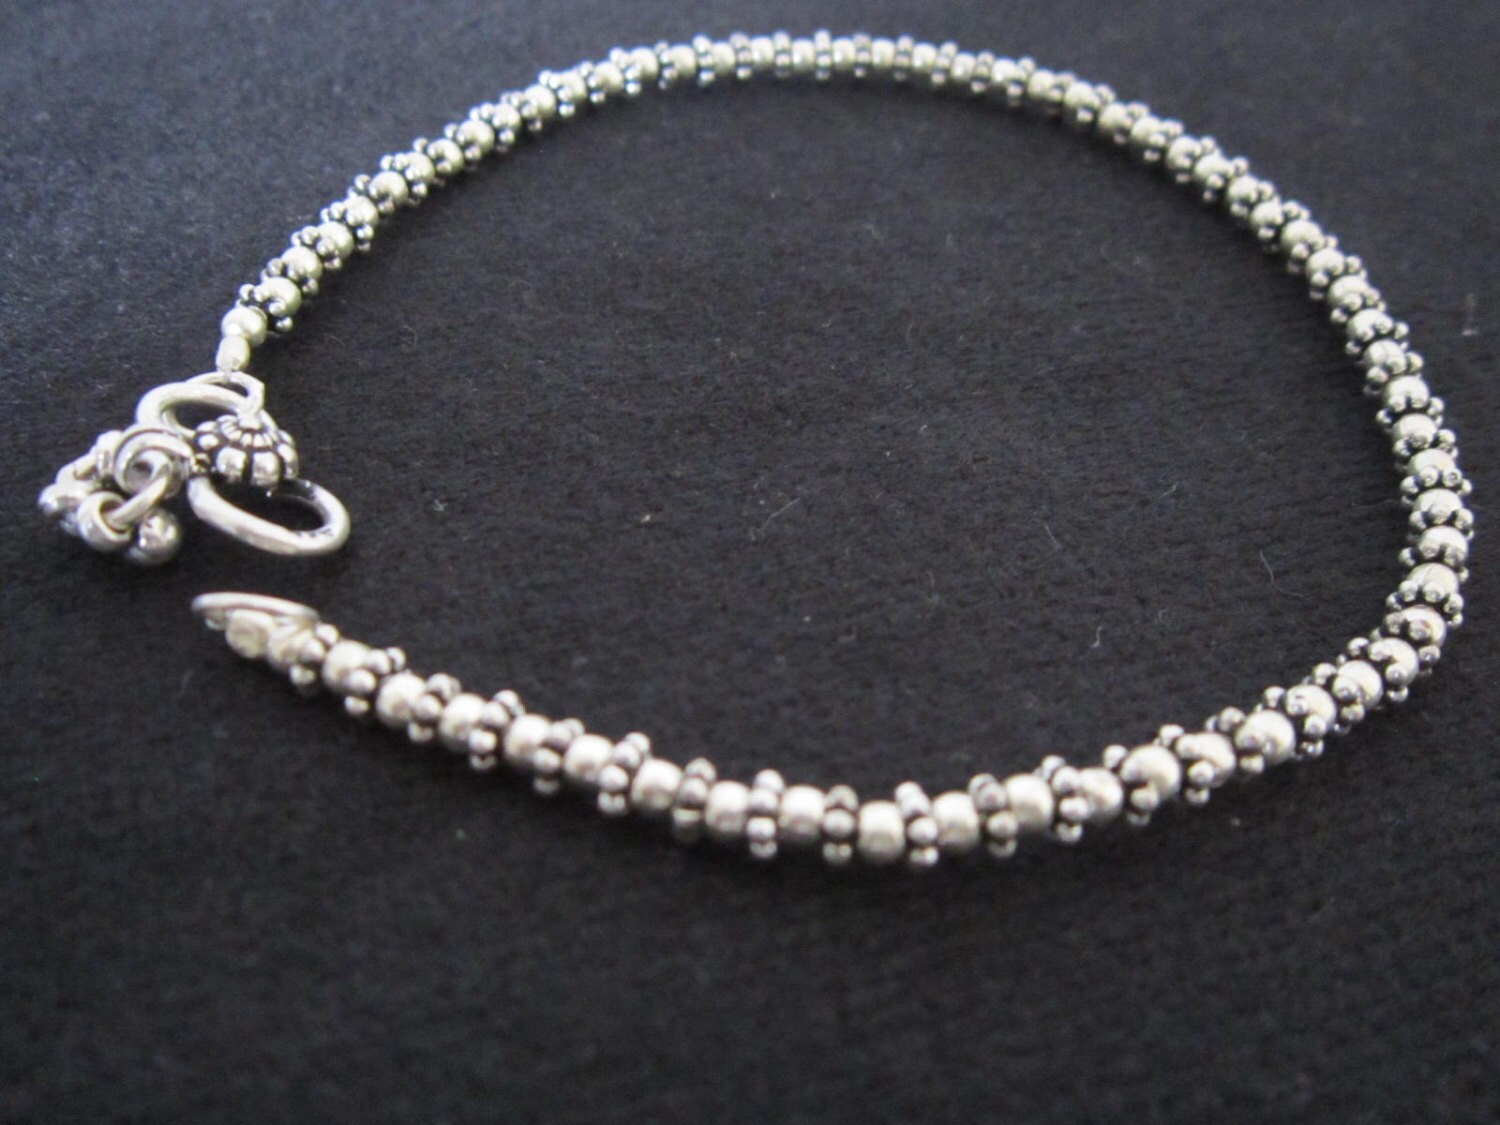 Old Silver Anklet from India Belly Dance Jewelry Rajasthani